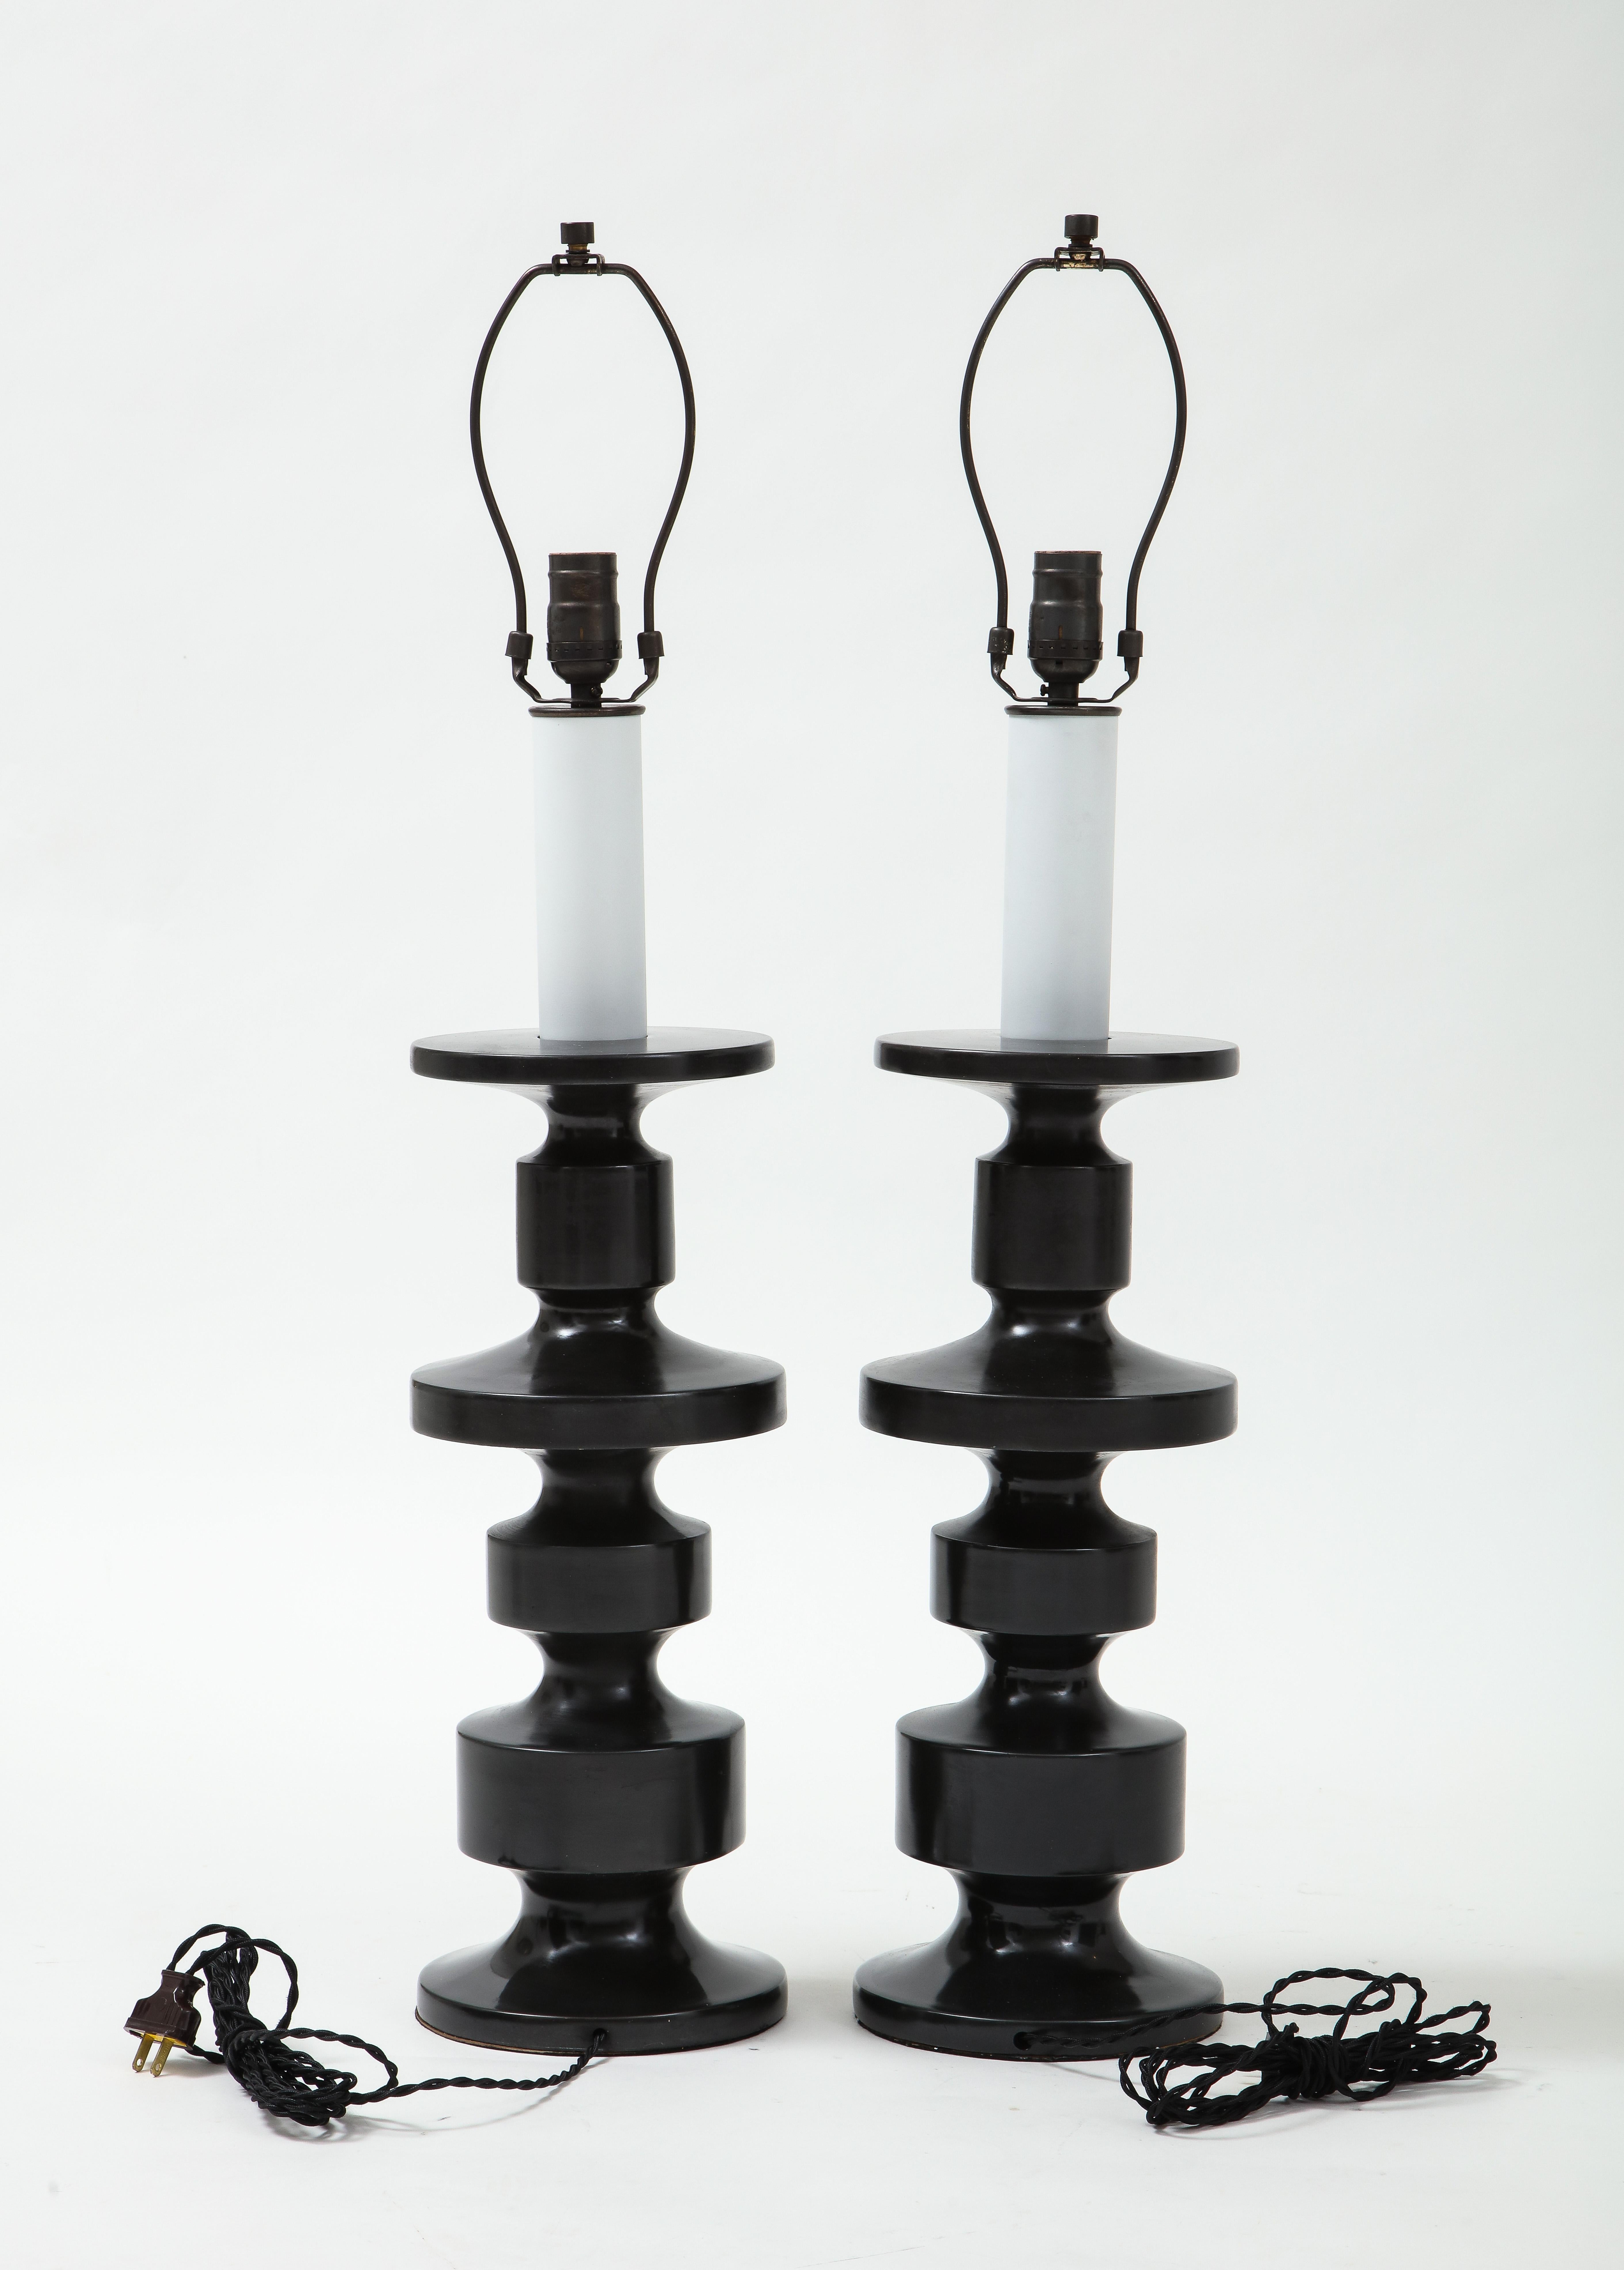 Custom finished totem lamps in a architectural dark bronze matte finish. Rewired for use in USA. 100W max bulbs. Height listed is an overall measurement including harp.